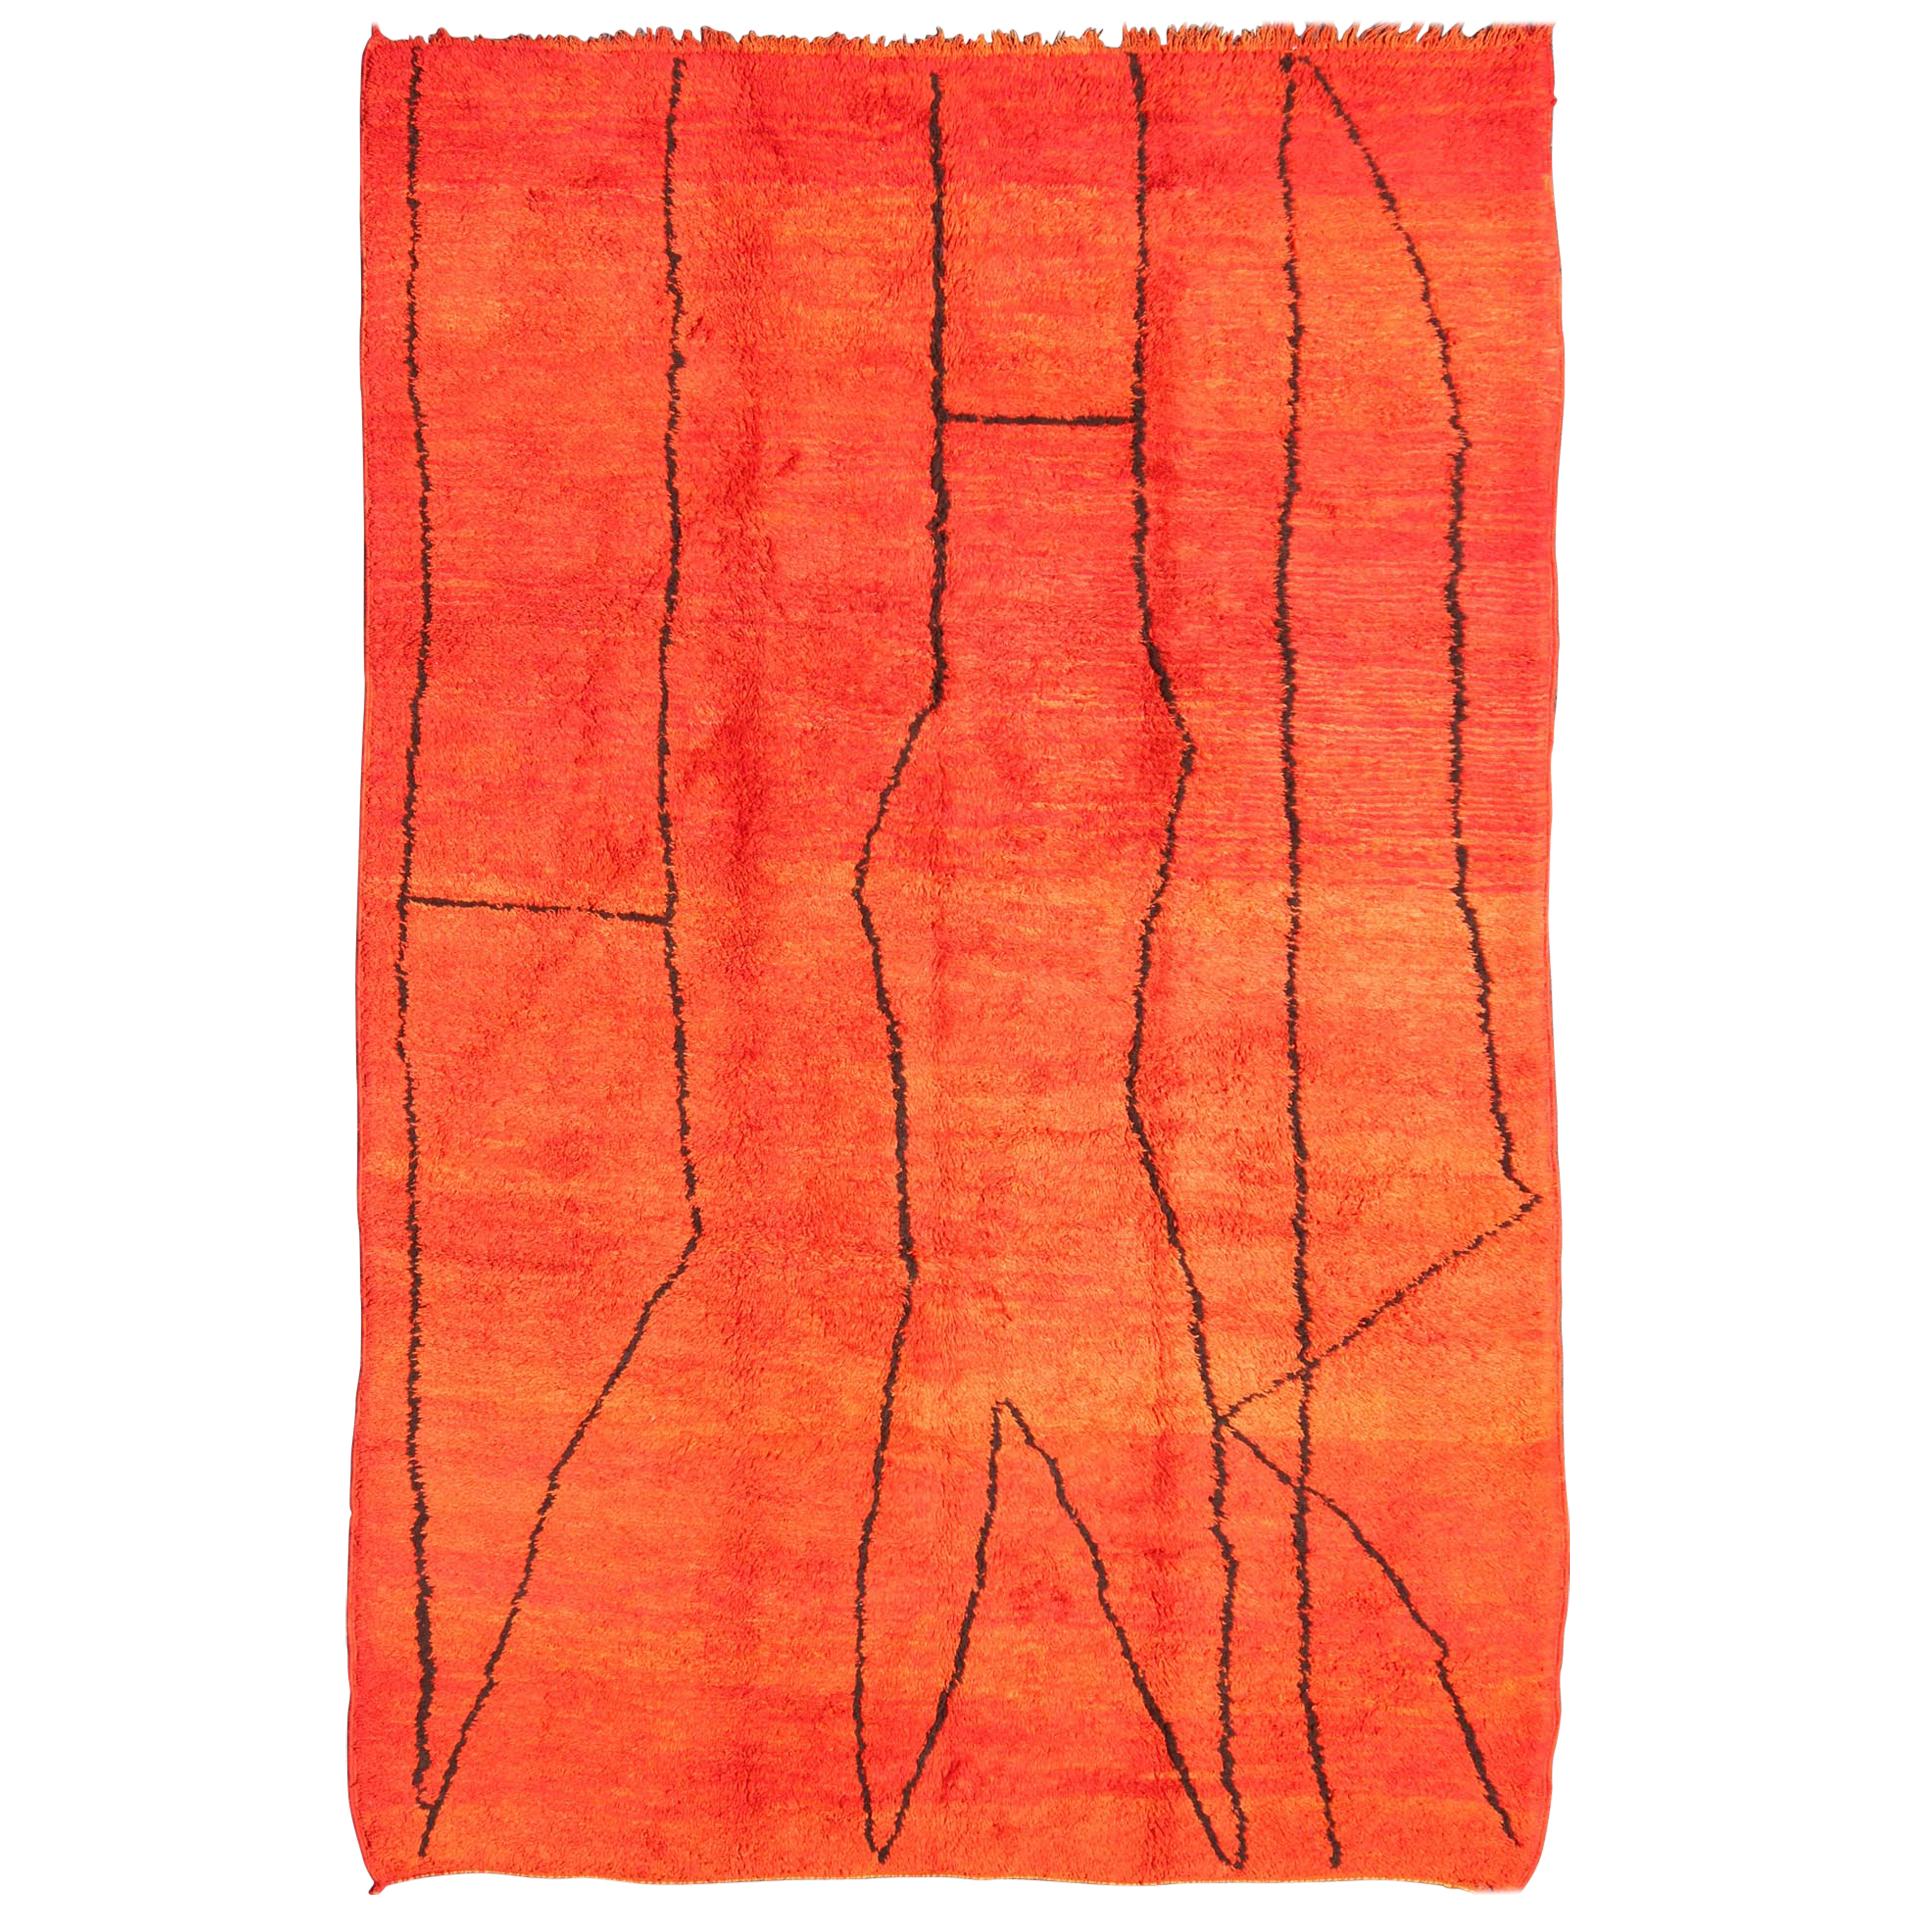 Vintage Moroccan Rug with Orange/Red and Charcoal Line in Modern Design